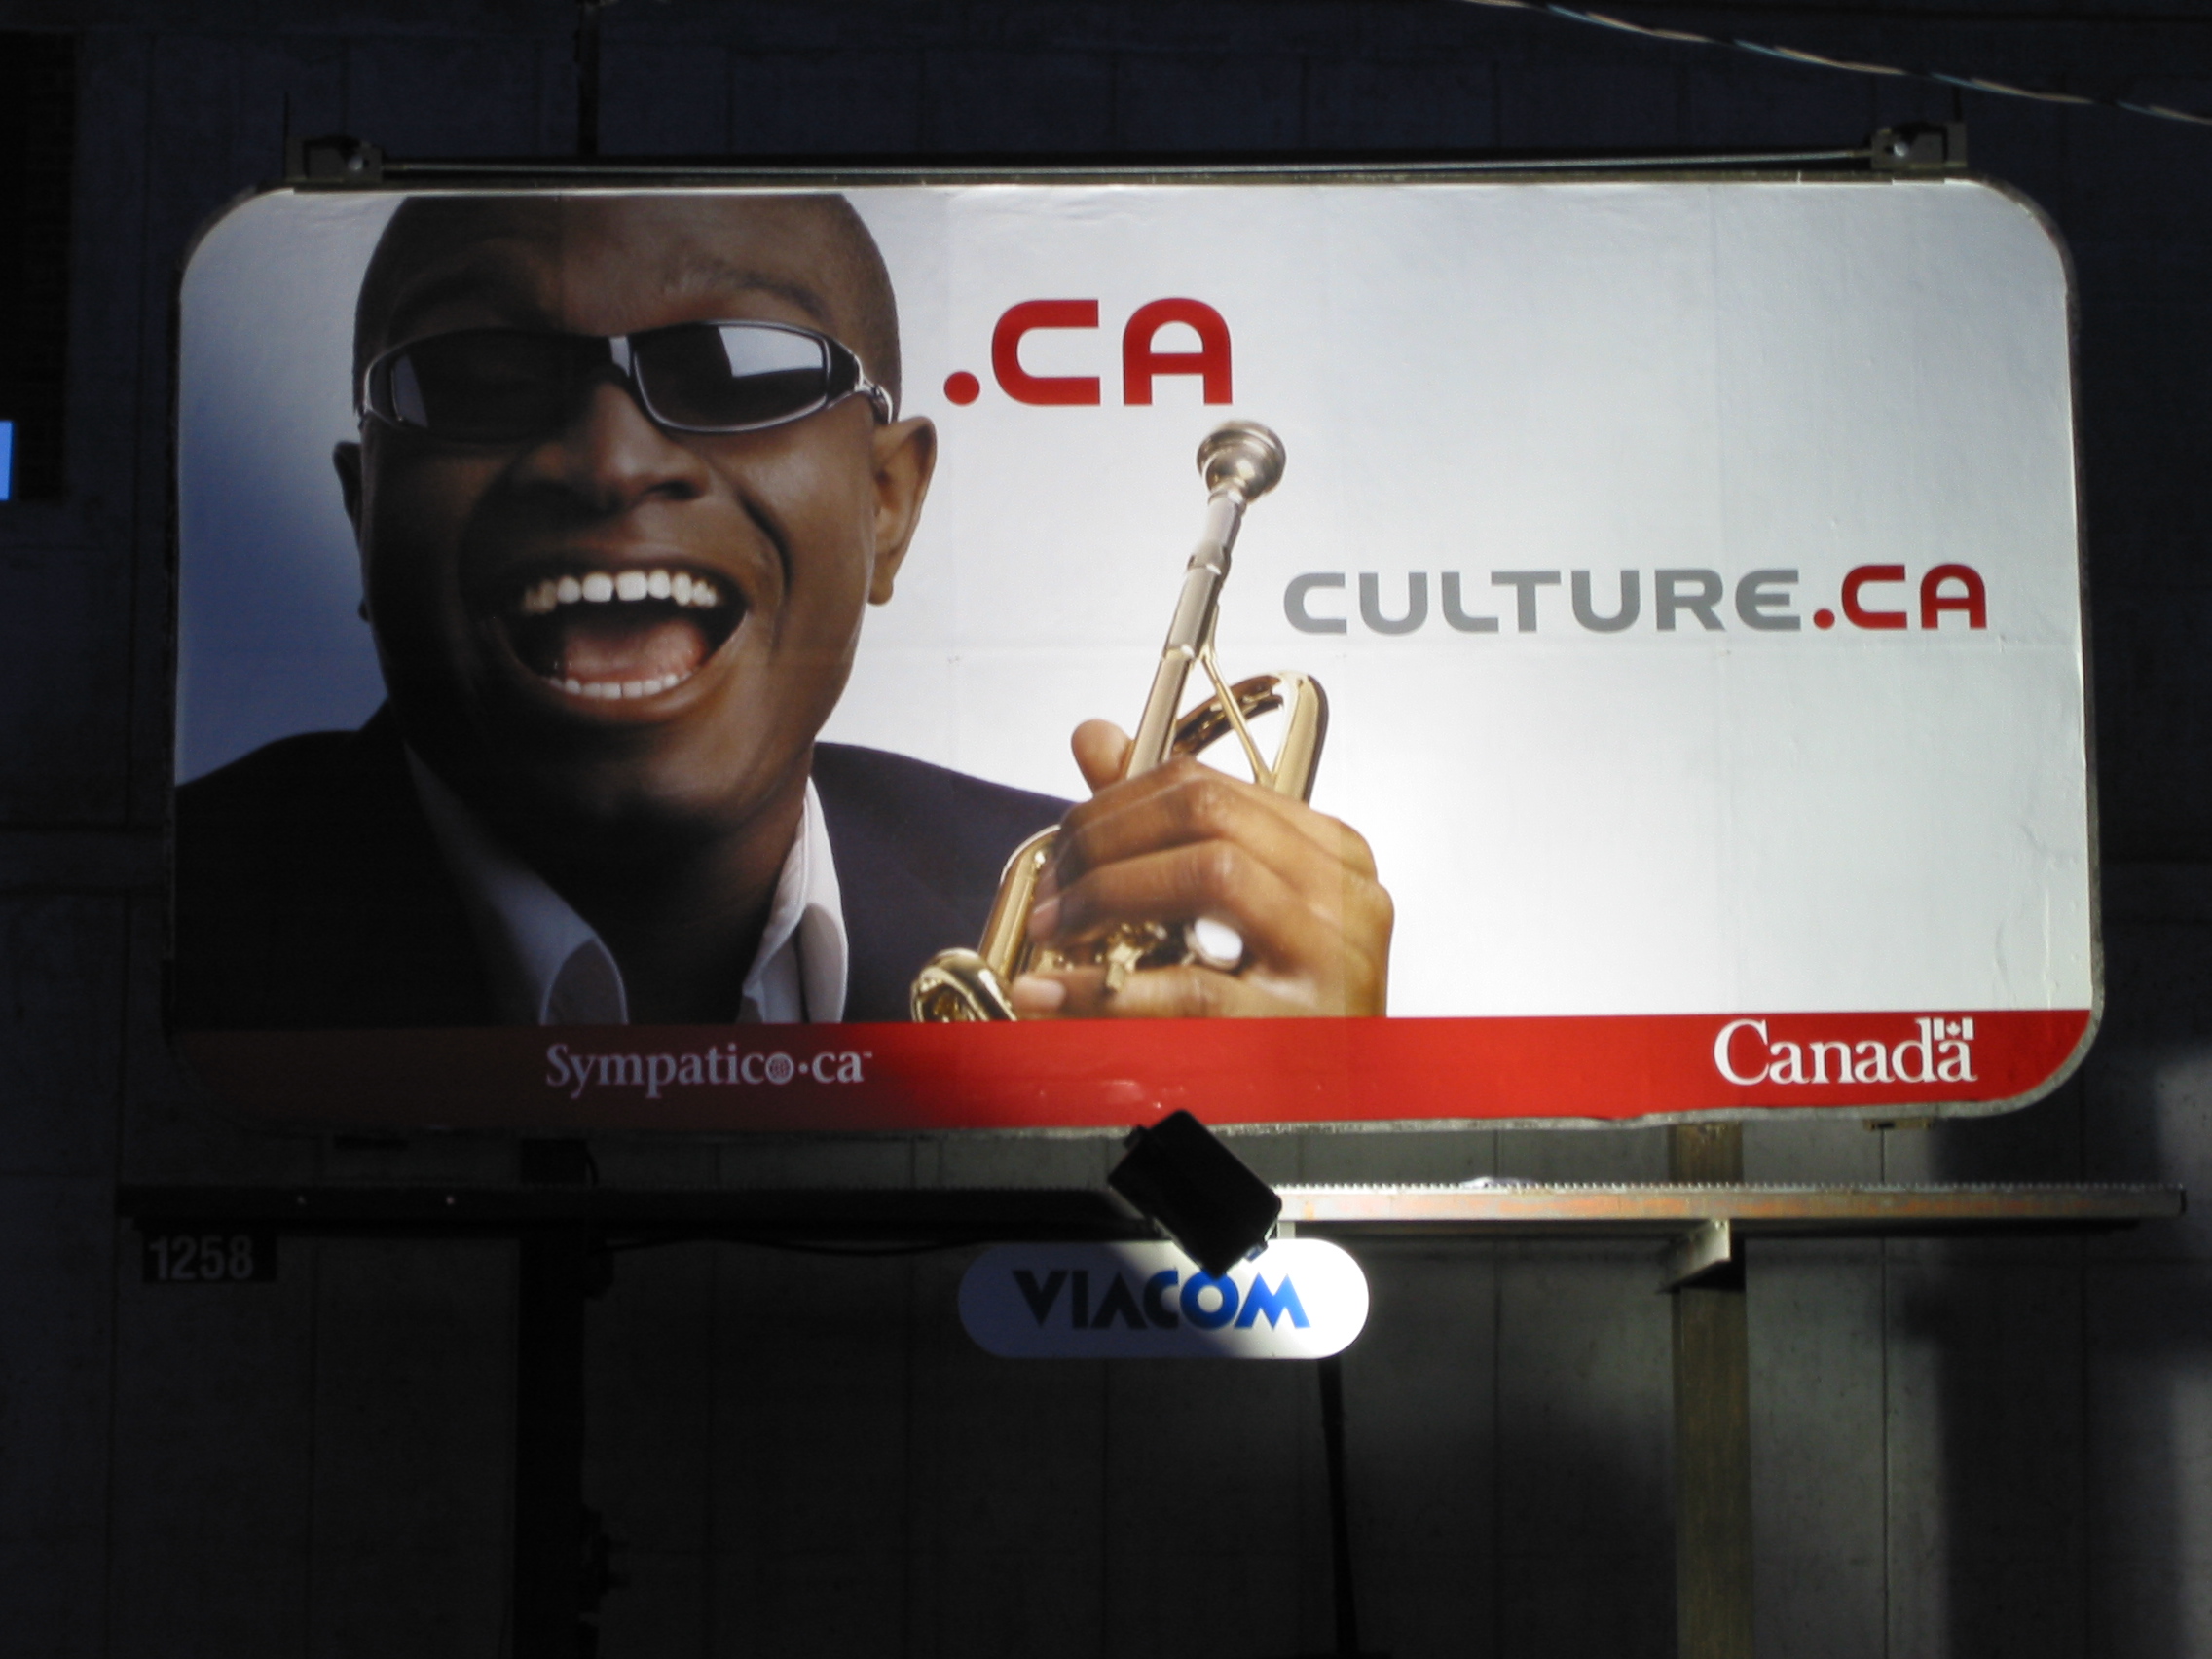 Photo of a billboard showing a man with a trumpet alongside the culture.ca branding